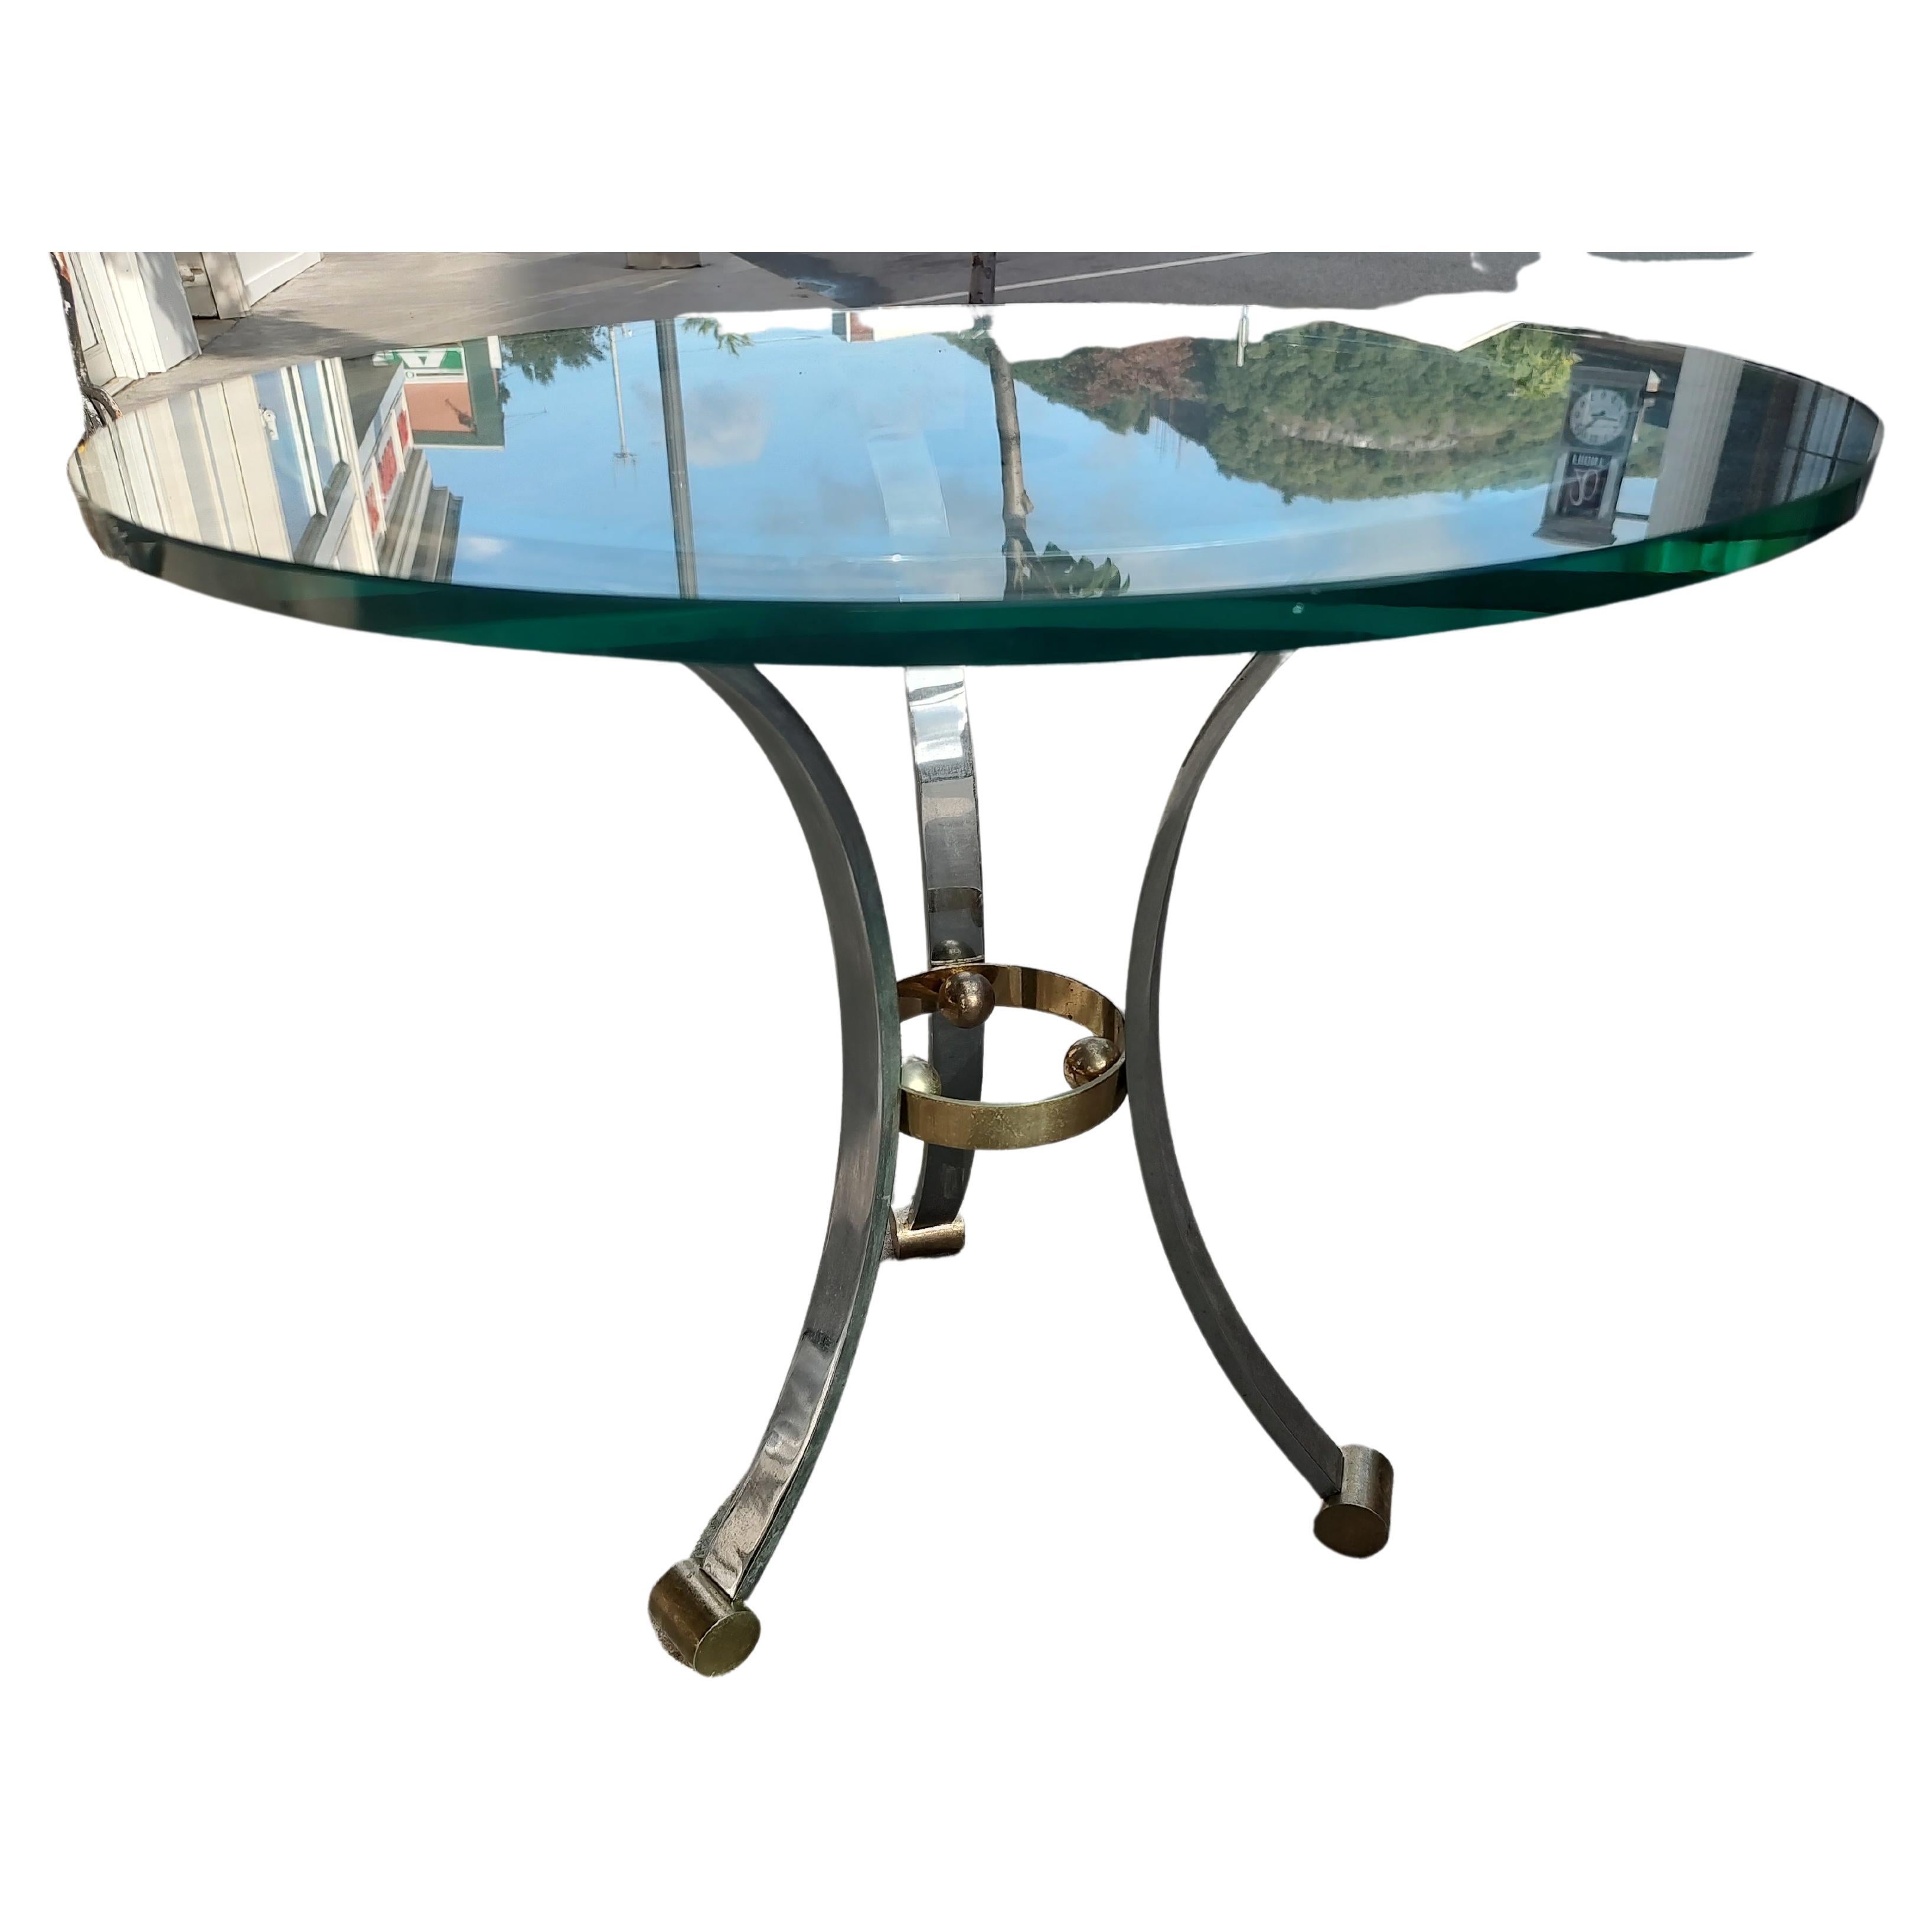 Fabulous side/end table attributed to Maison Jansen with 3 heavy chrome flat bar legs ending in brass cylindrical feet. Thick 5/8 glass top is near perfect, no chips. Quality piece. Will polish before leaving the gallery.